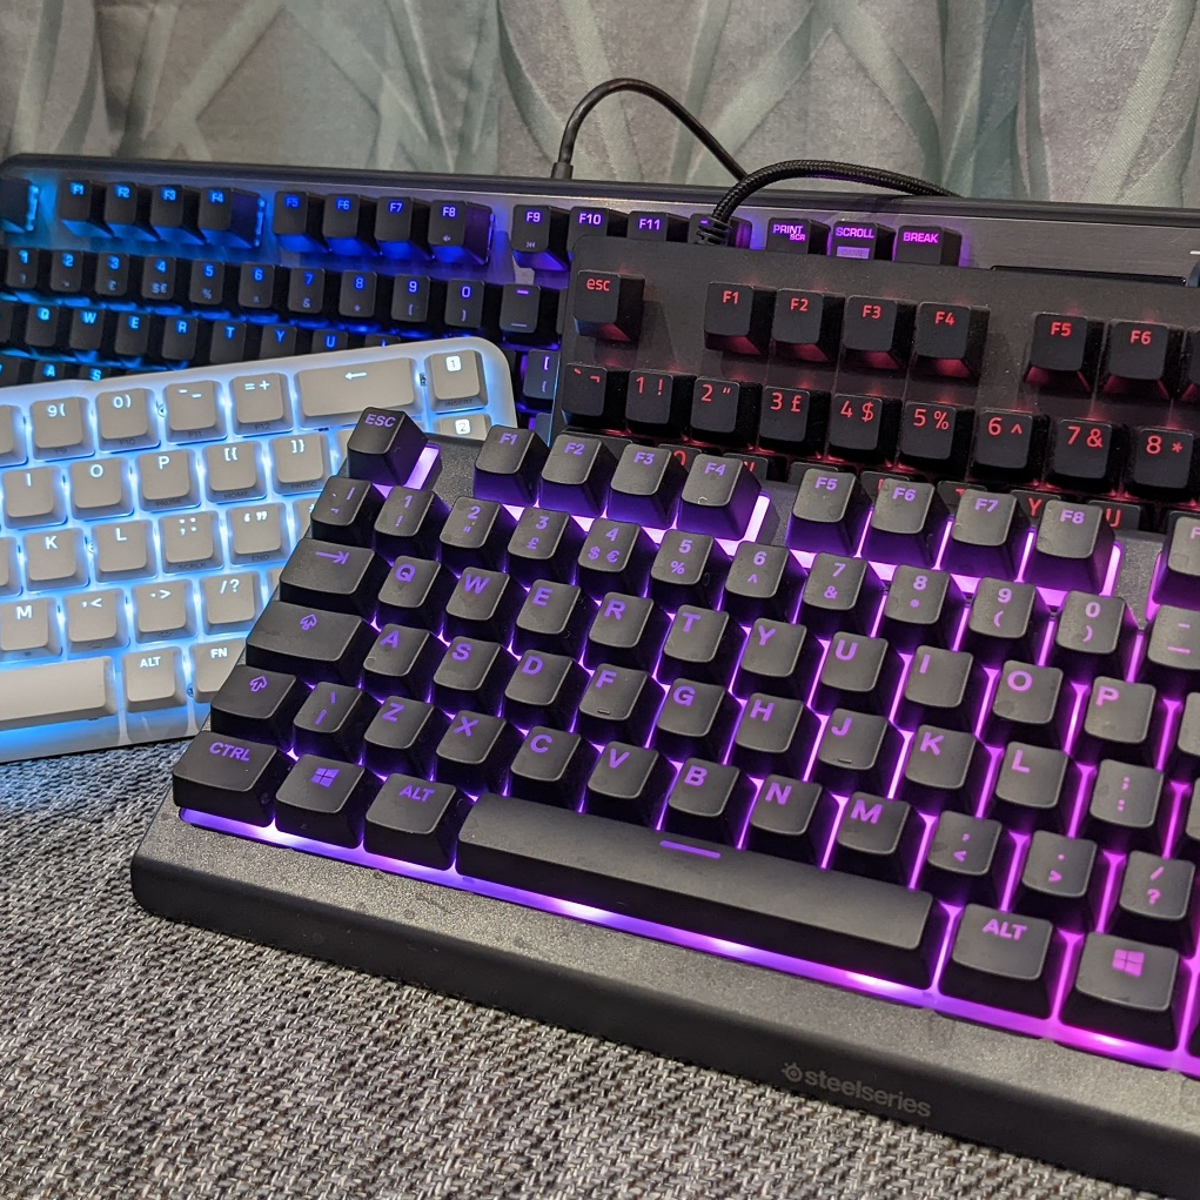 Best gaming keyboard: the top mechanical and wireless keyboards